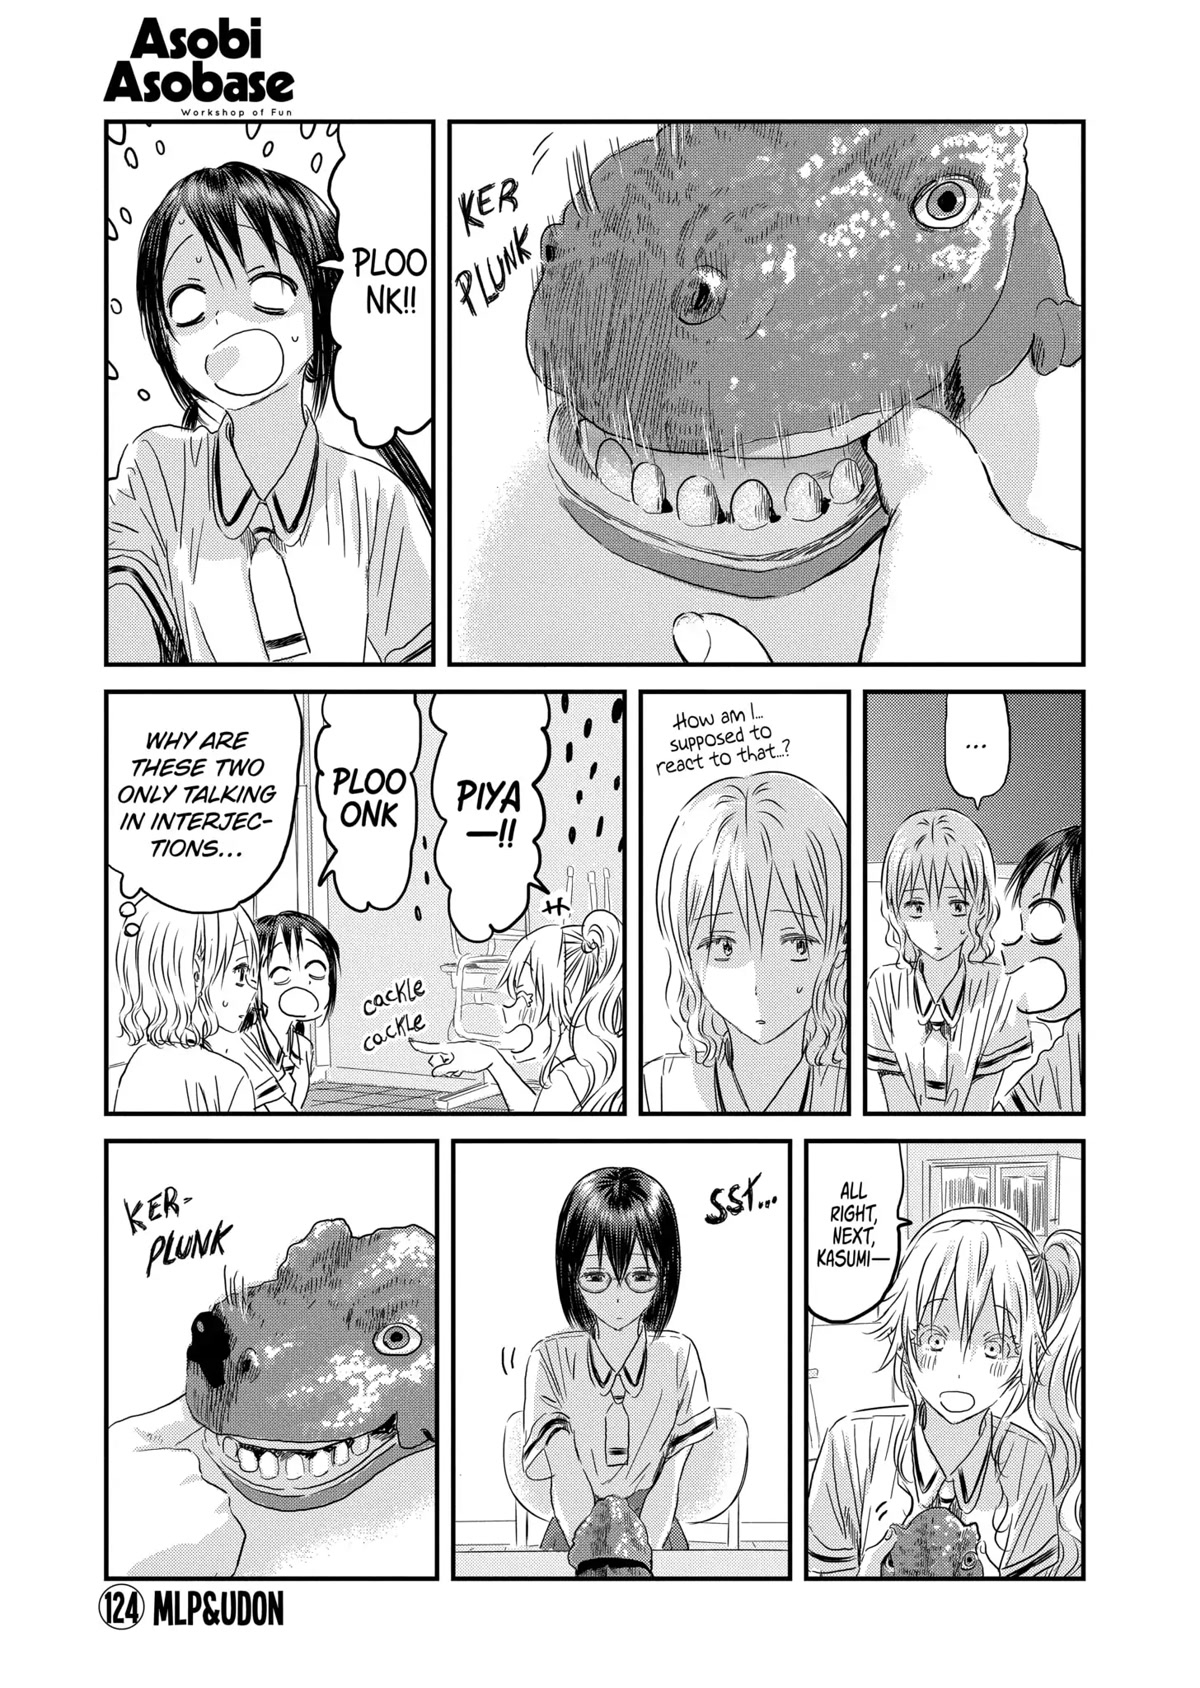 Asobi Asobase Chapter 124: Mlp & Udon - Picture 1